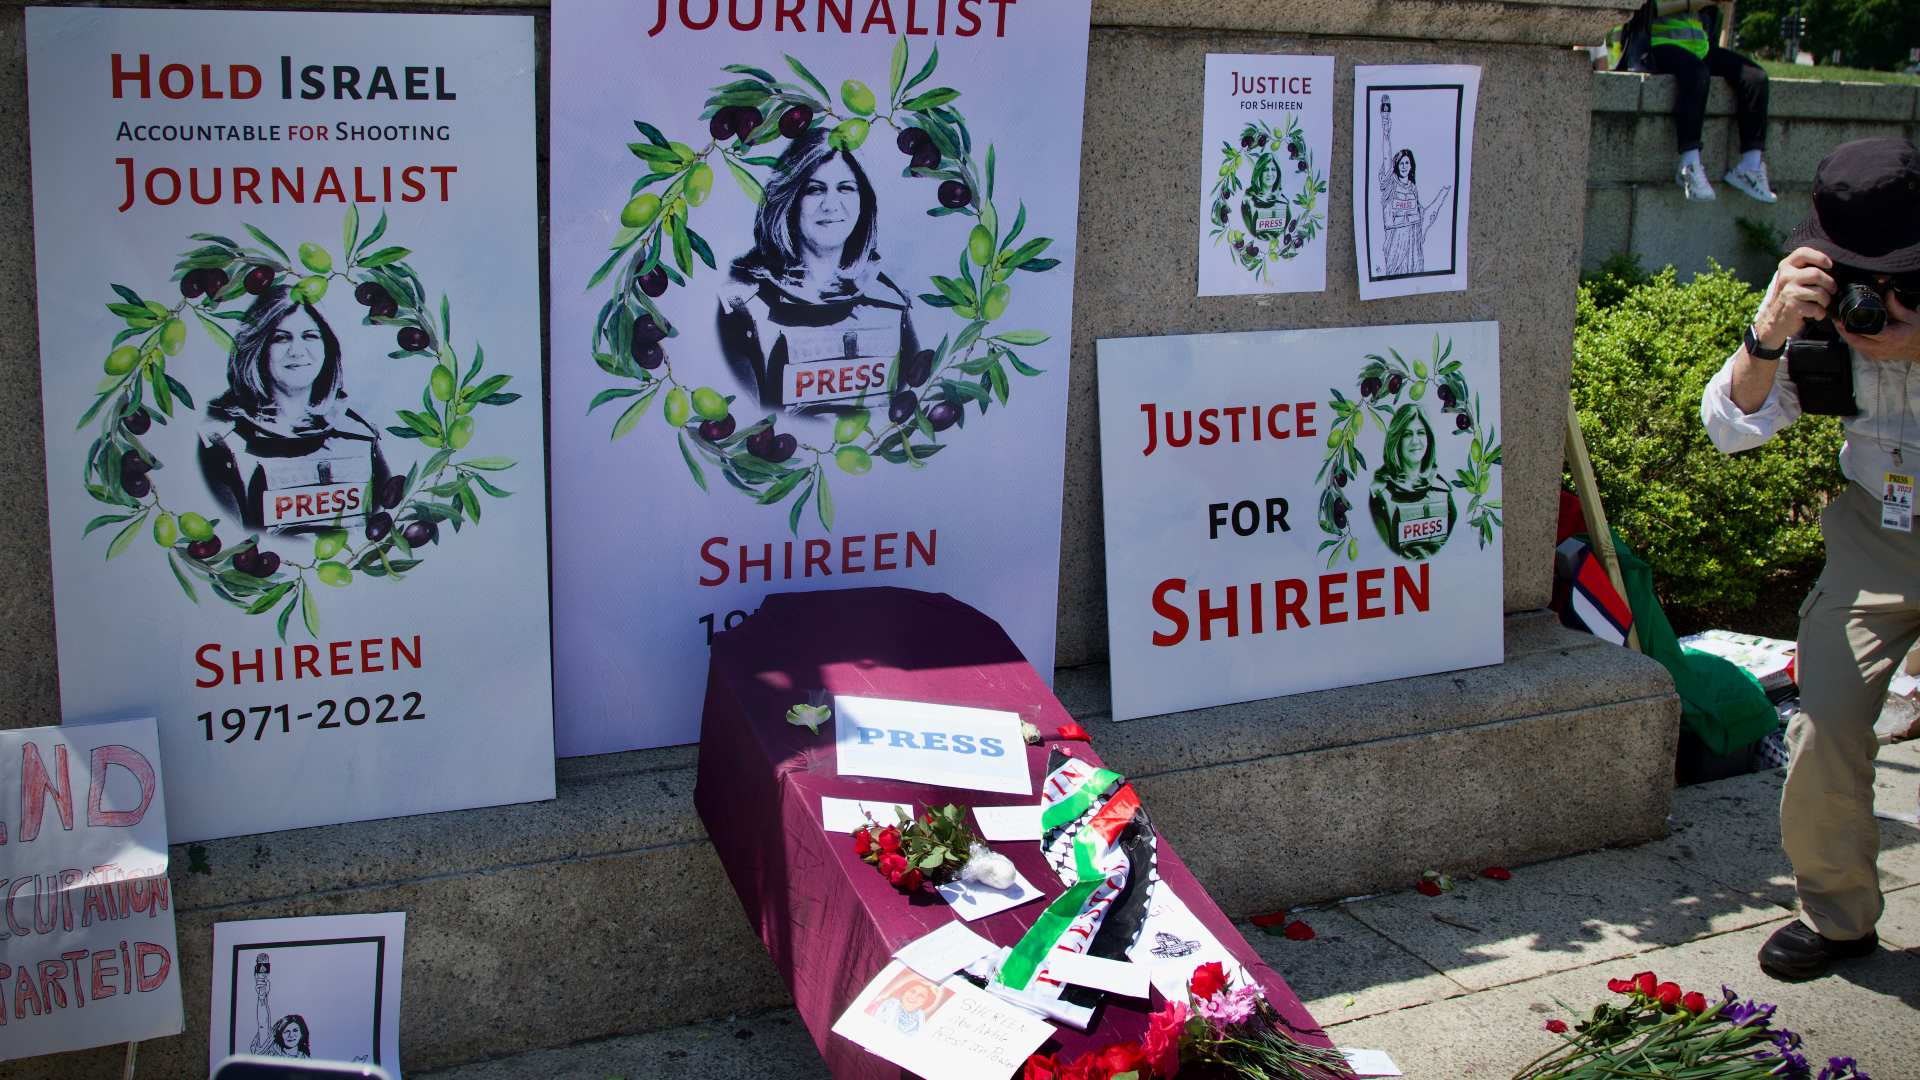 Organisers set up a memorial at the rally in Washington for Palestinian journalist Shireen Abu Akleh who was killed last week.